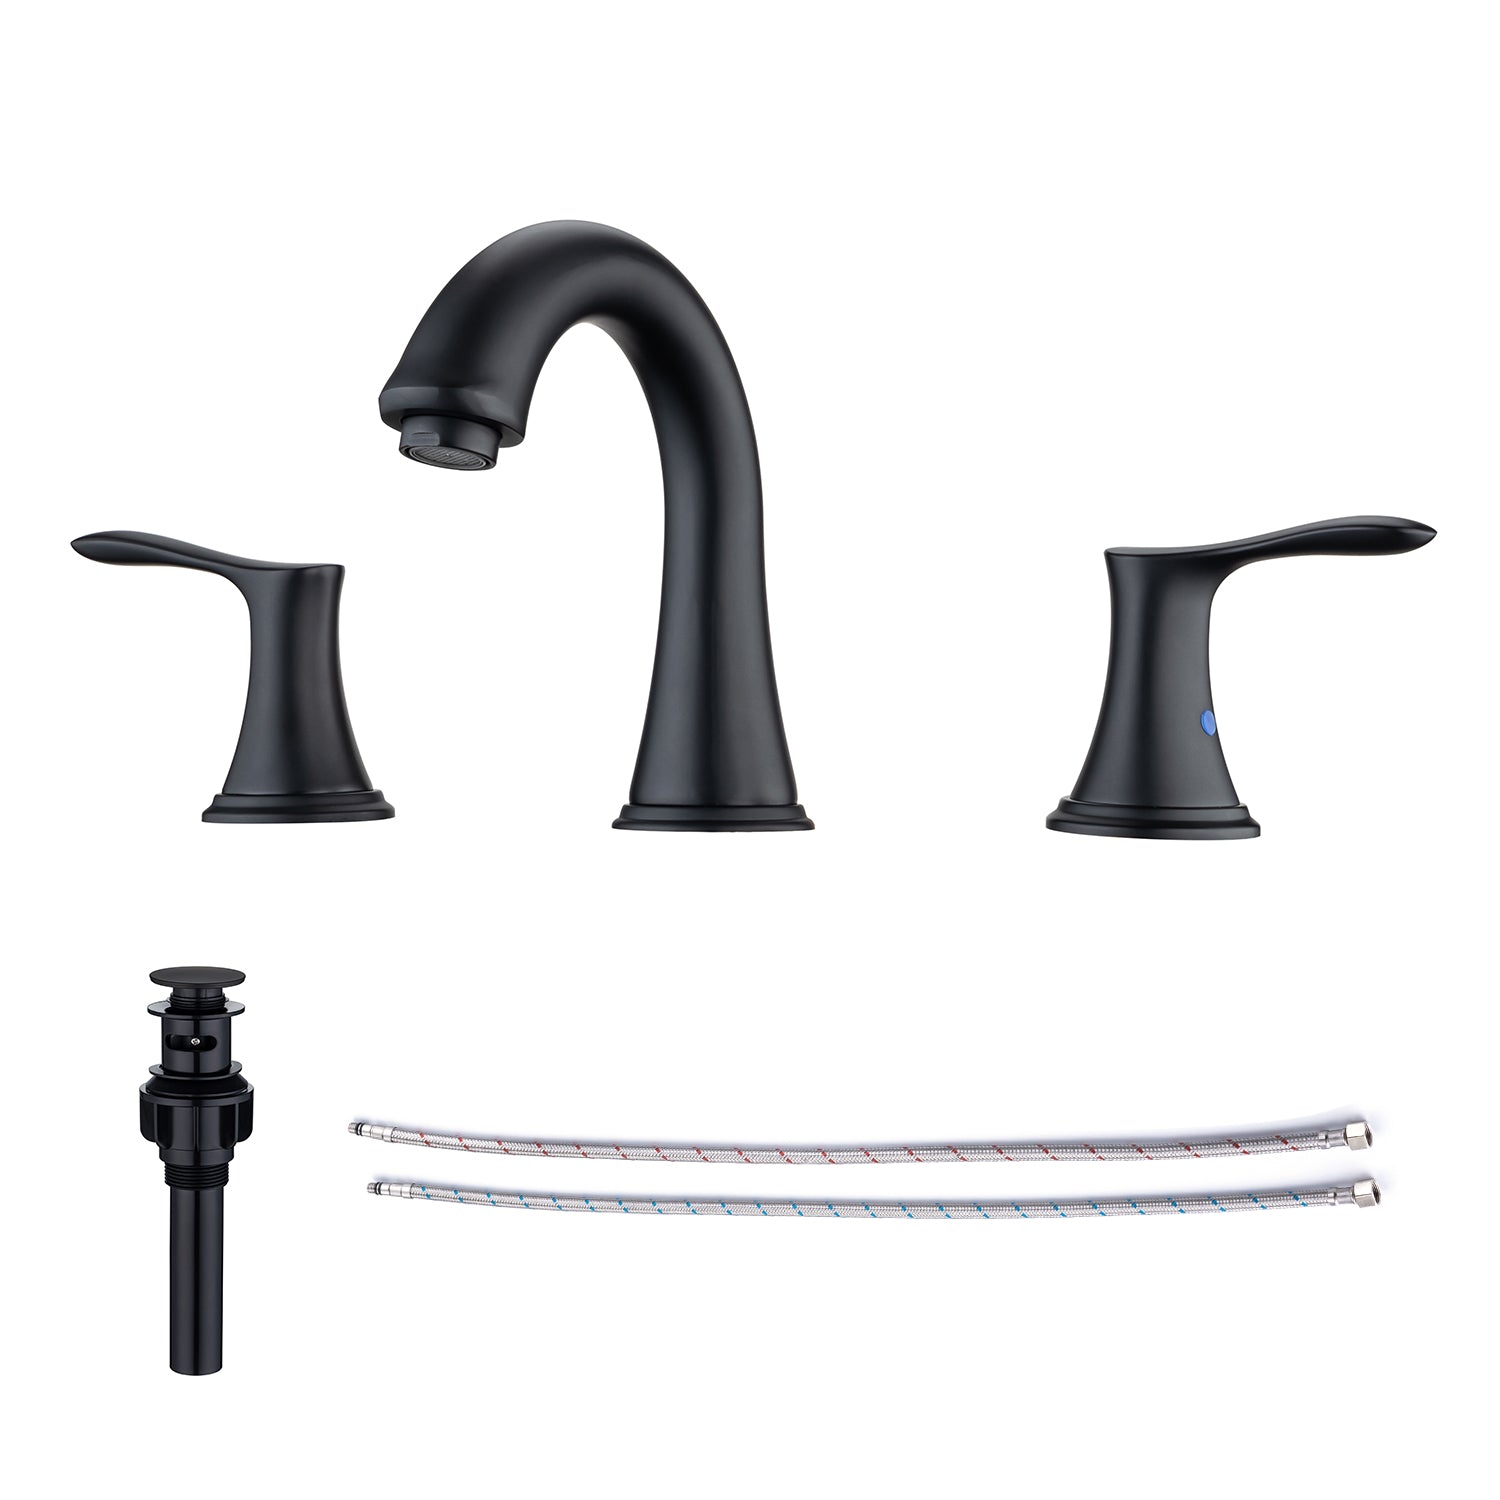 Widespread Faucet 2-handle Bathroom Faucet with Drain Assembly RX83007